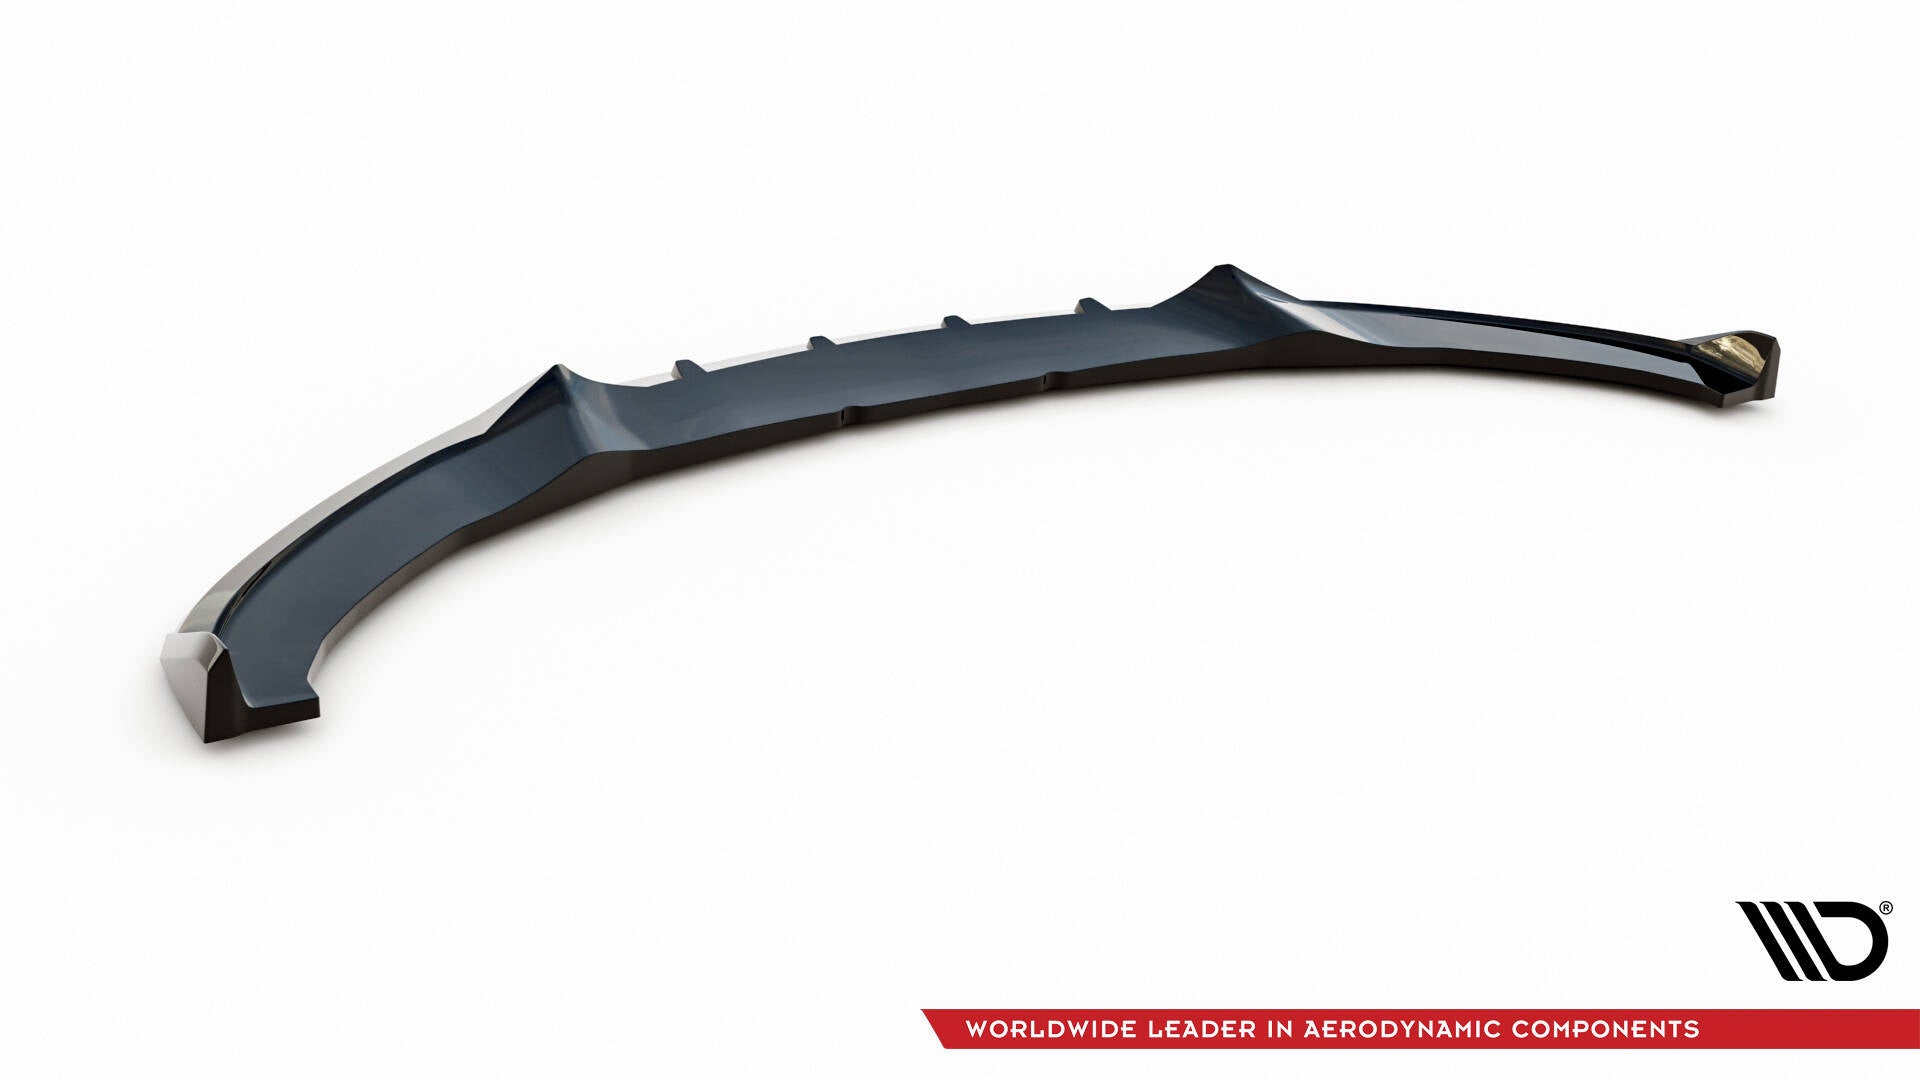 Front Splitter V.4 BMW 4 Coupe / Gran Coupe / Cabrio M-Pack F32 / F36 / F33